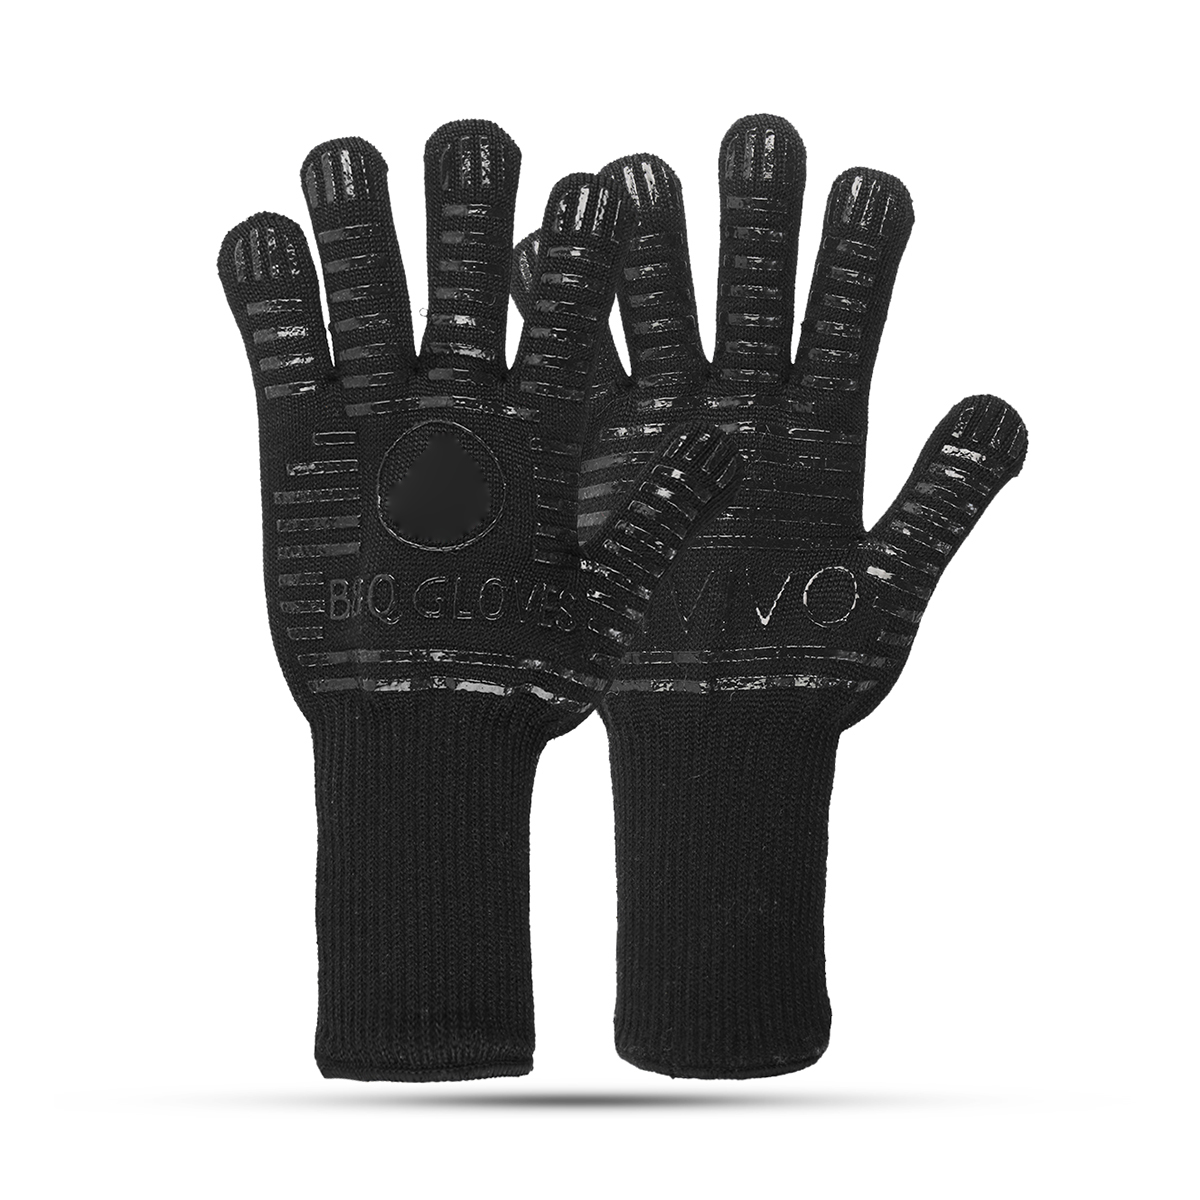 Lengthen-Insulate-Anti-skid-Glove-Heat-Resistance-Gloves-For-BBQ-Oven-Grill-Cook-Bake-1281222